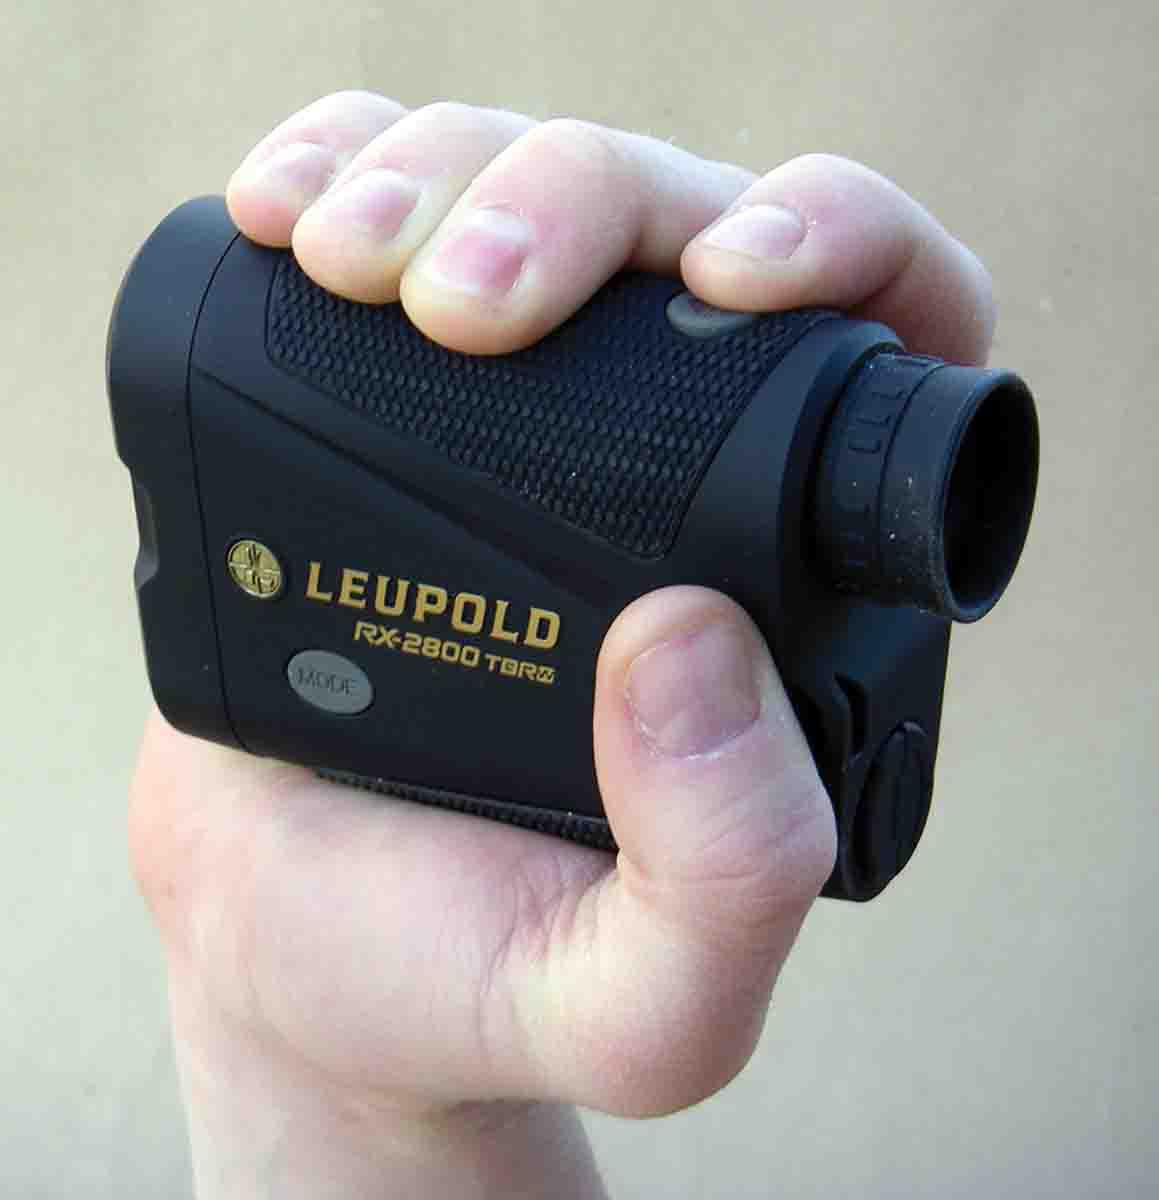 The Leupold RX-2800 TBR/W digital rangefinder is lightweight and compact, and it has provided Brian with reliable readings at distances beyond 2,500 yards.